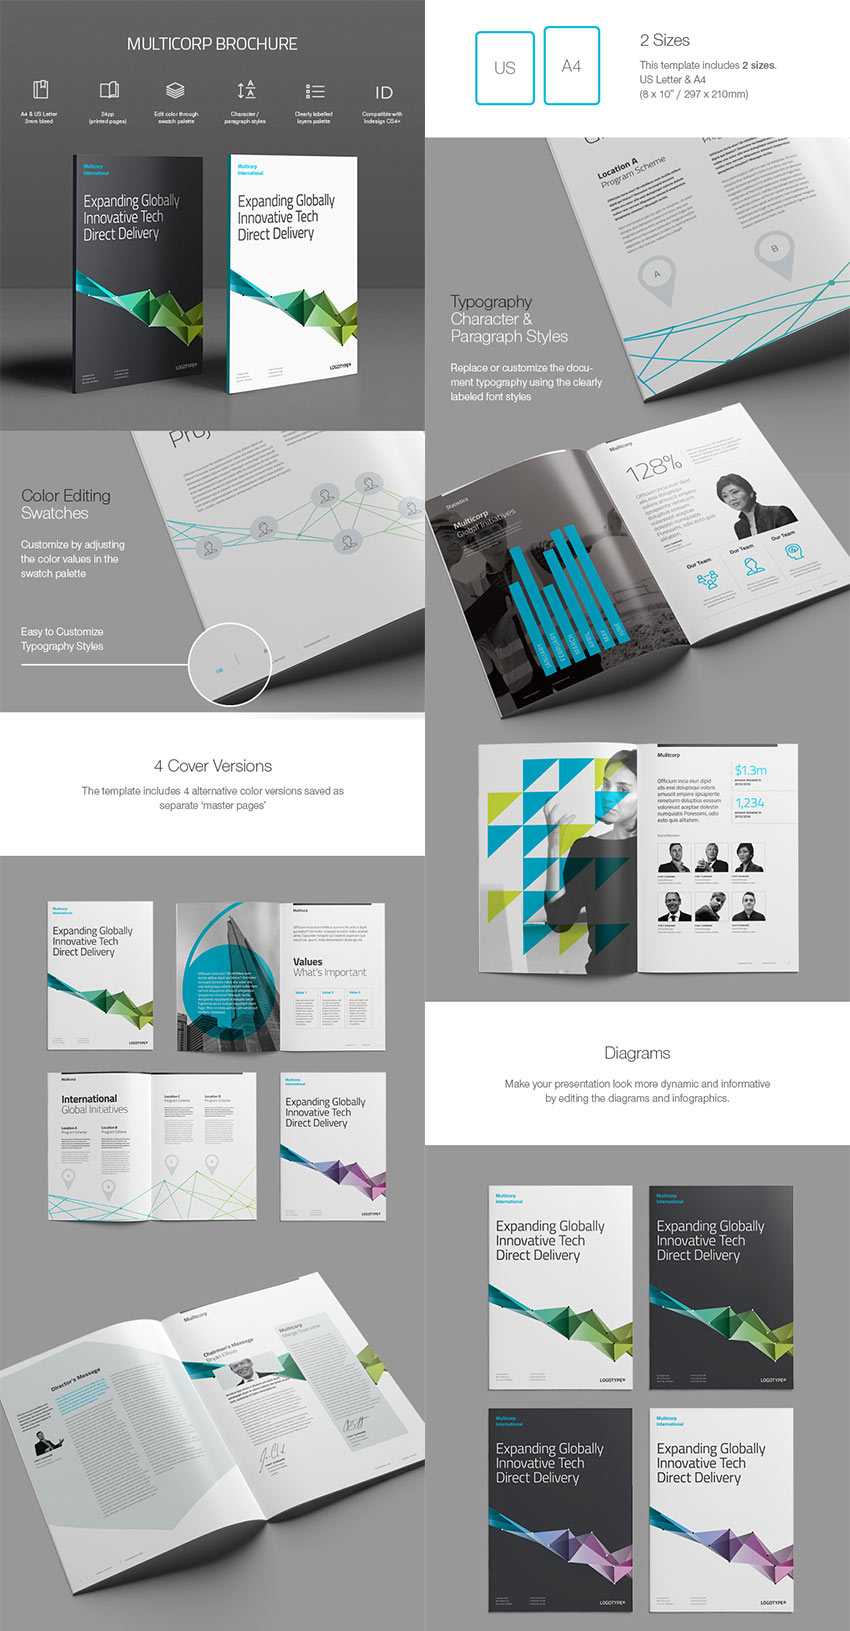 20+ Best Indesign Brochure Templates – For Creative Business In Adobe Indesign Brochure Templates